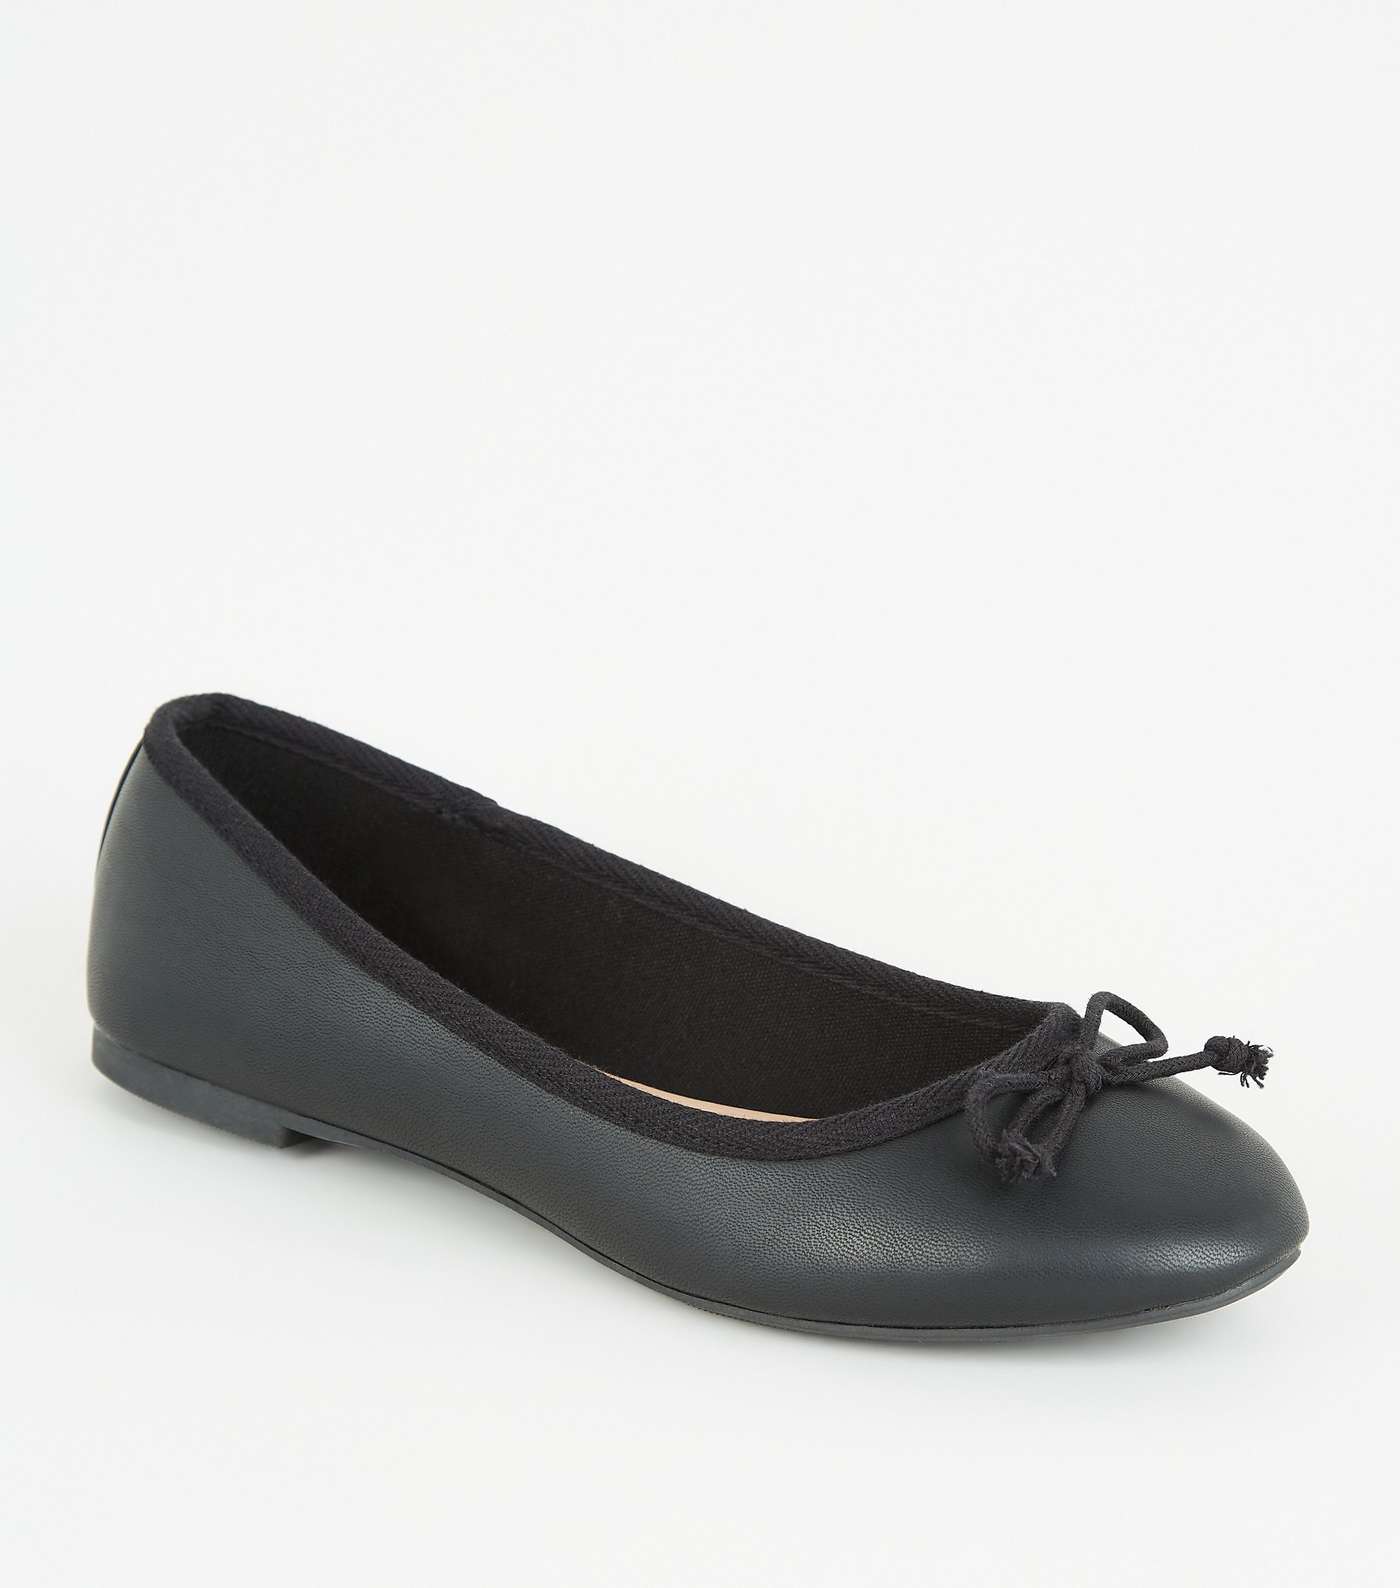 Black Leather-Look Bow Front Ballet Pumps